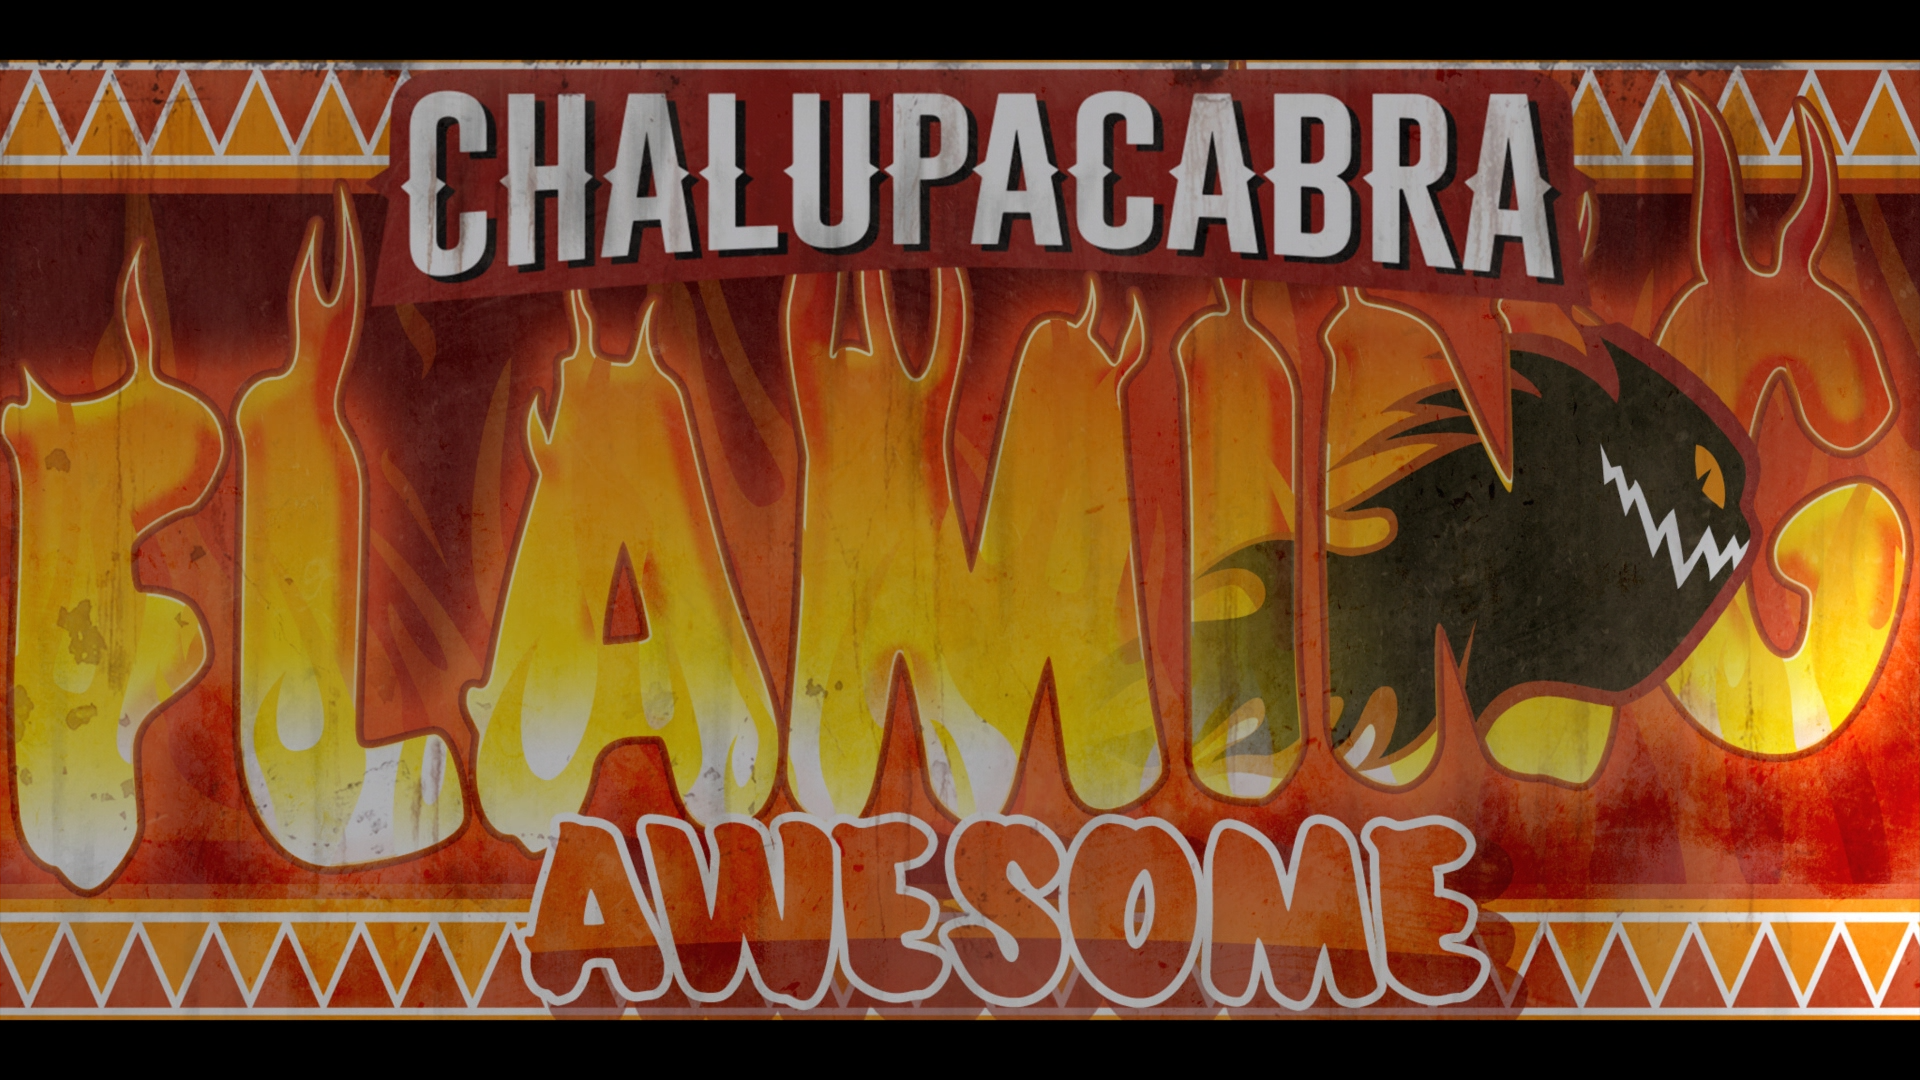 A screenshot from Saints Row showing the Venture title card for the Chalupacabra restaurant with a flaming pepper